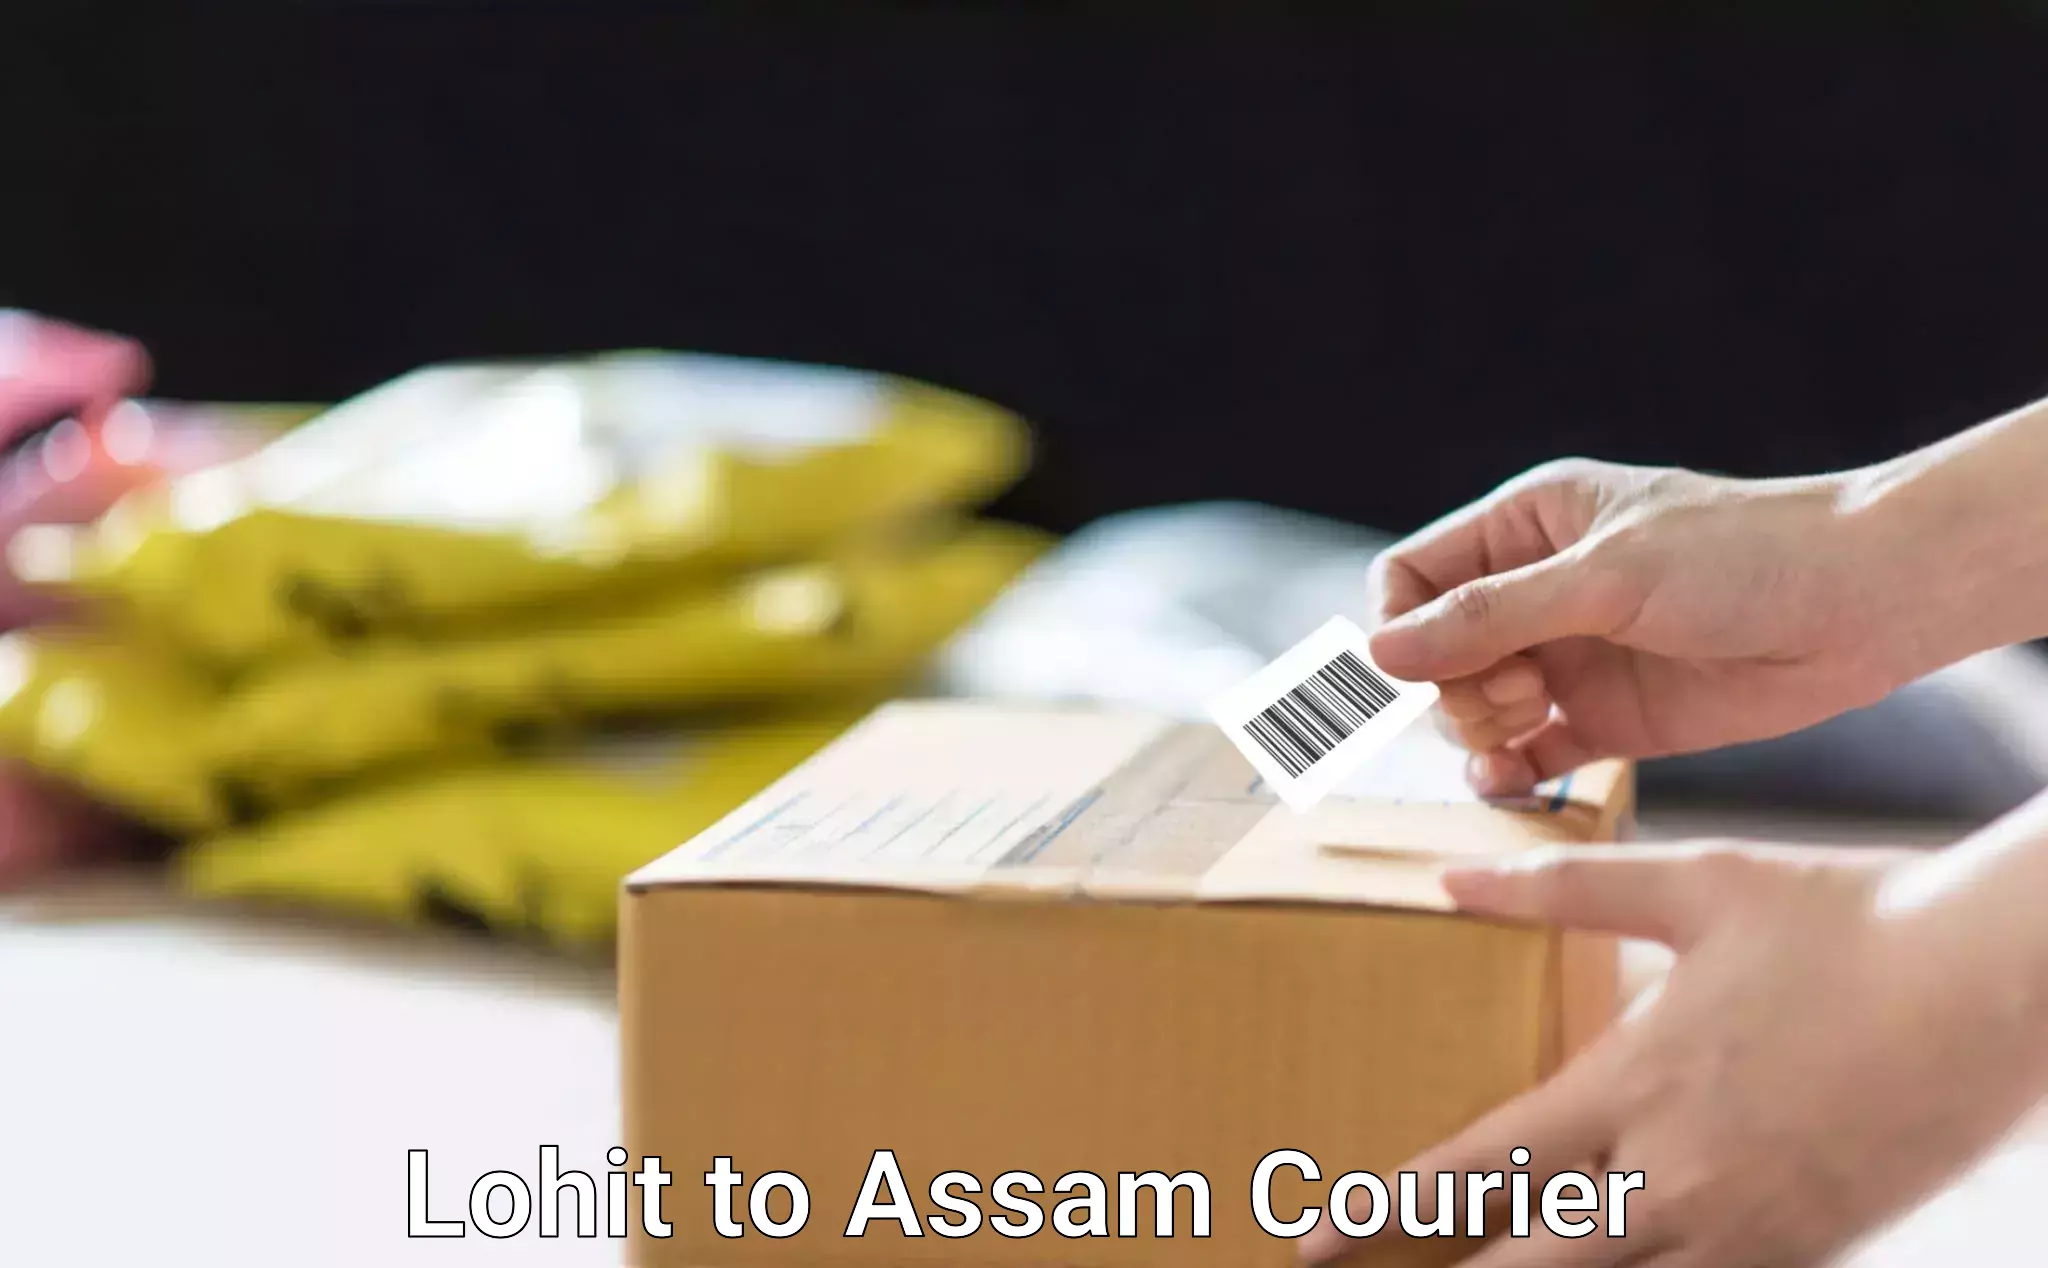 Personal parcel delivery Lohit to Silchar